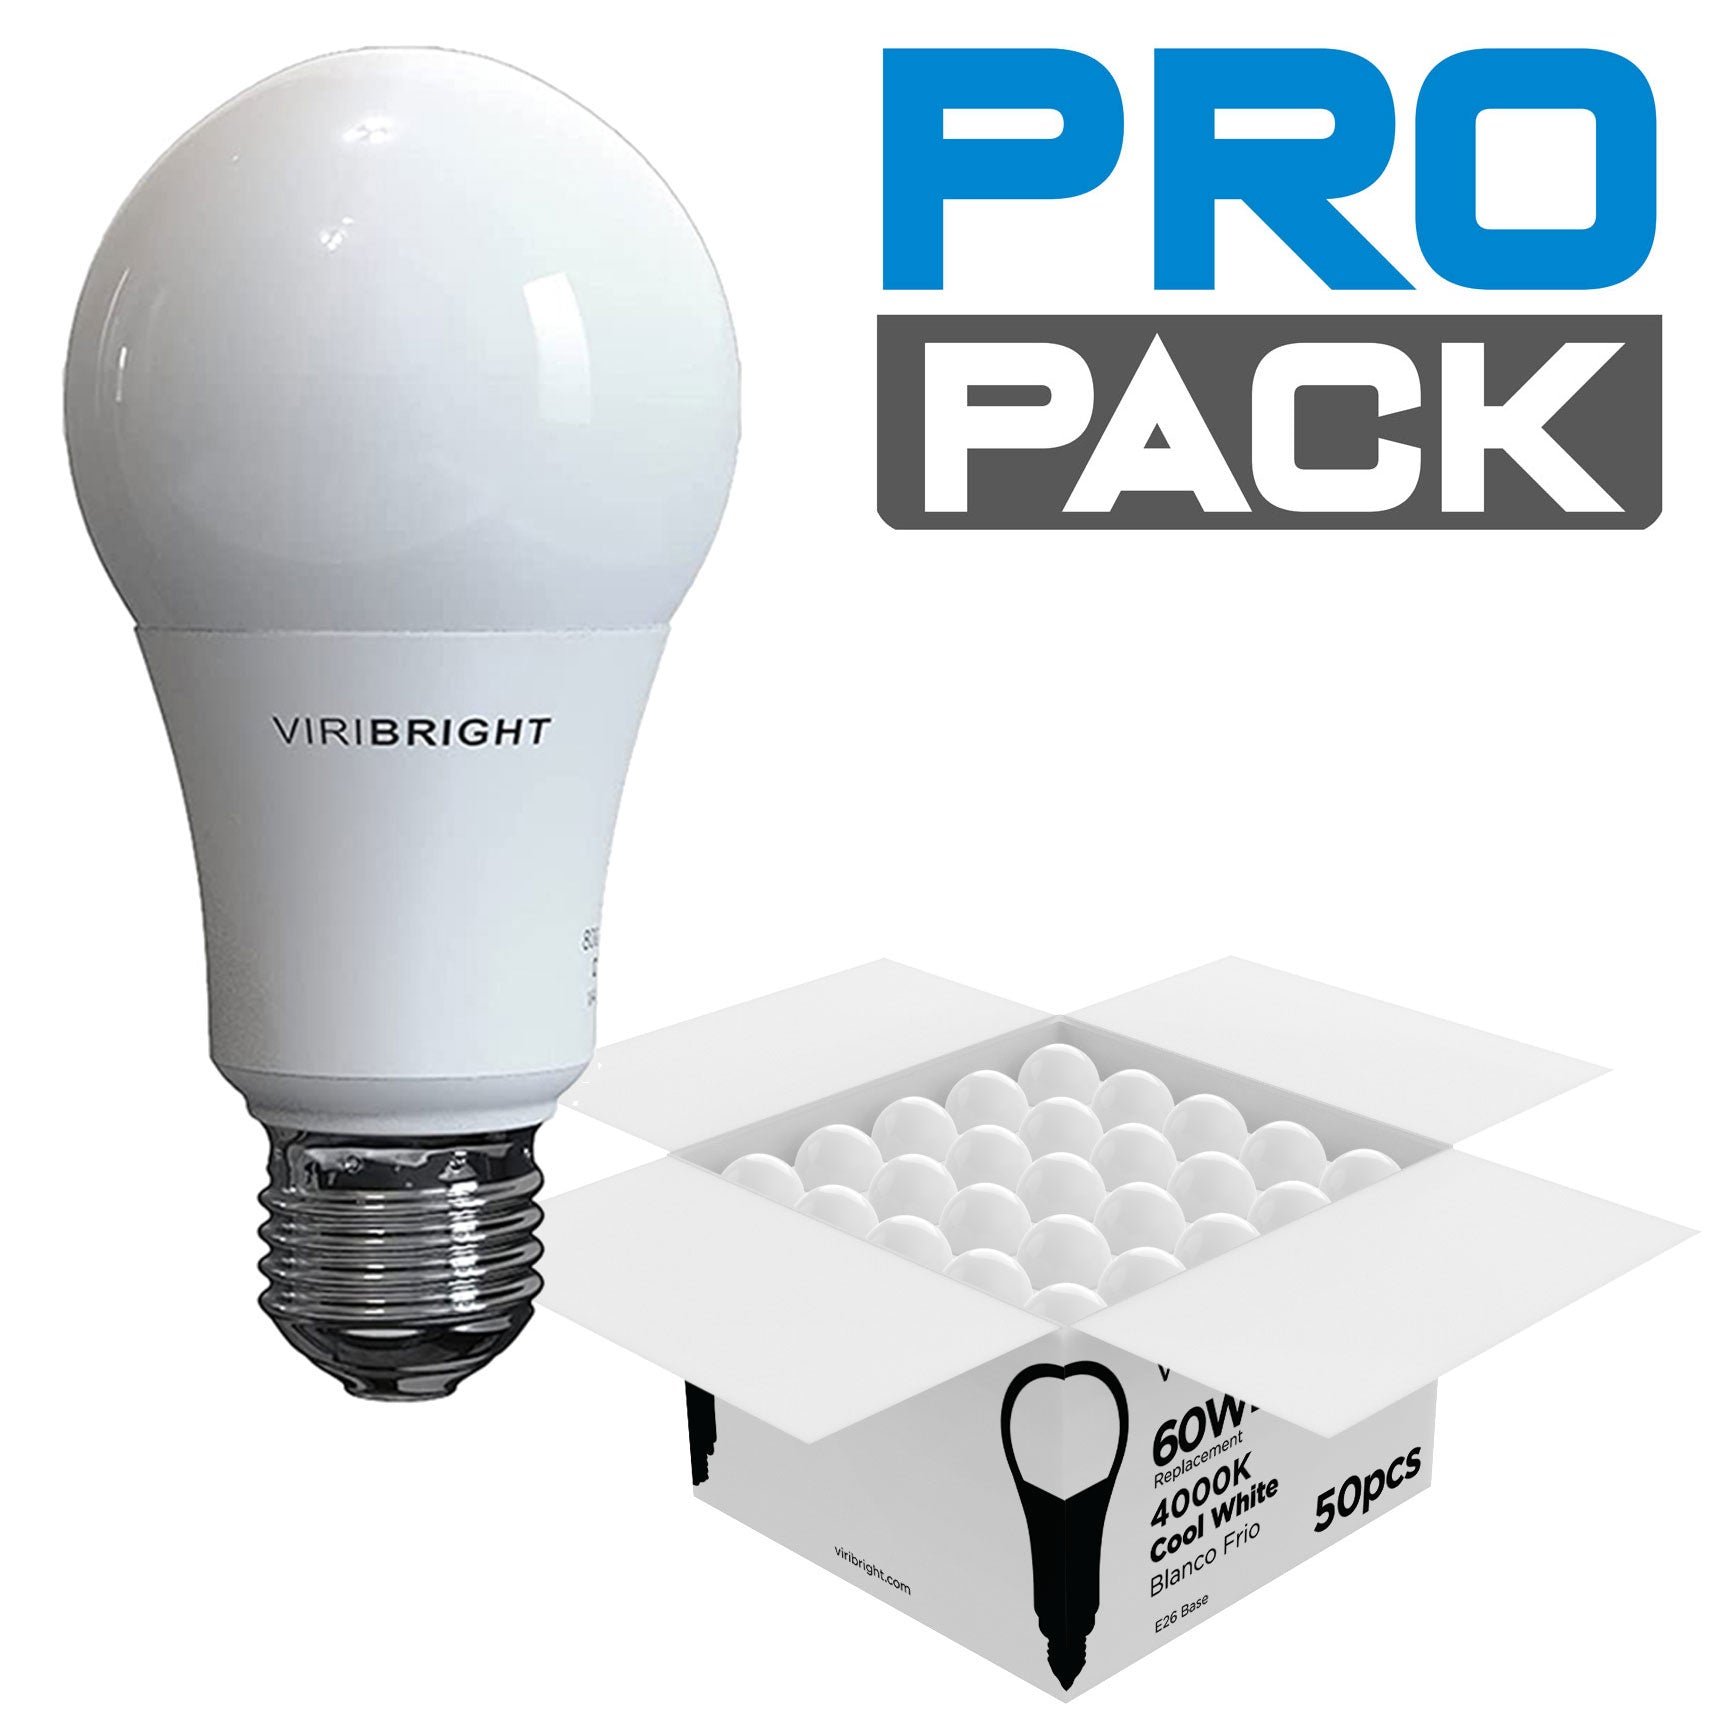 Power Outage Lights - Everyday LED Light Bulbs Work In A Power Failure